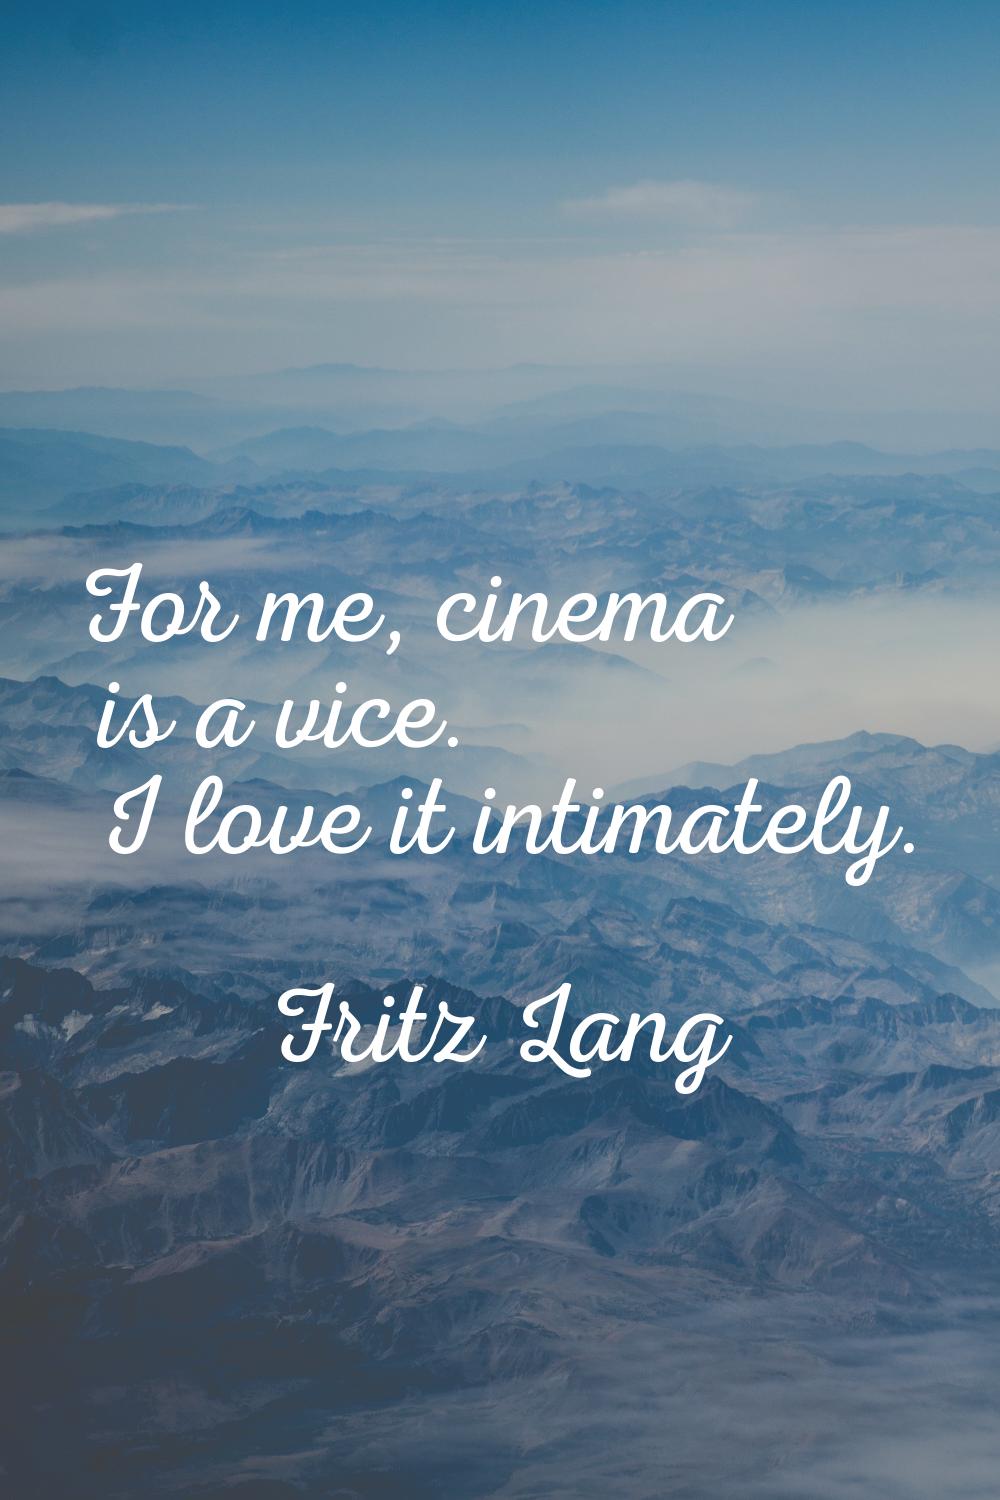 For me, cinema is a vice. I love it intimately.